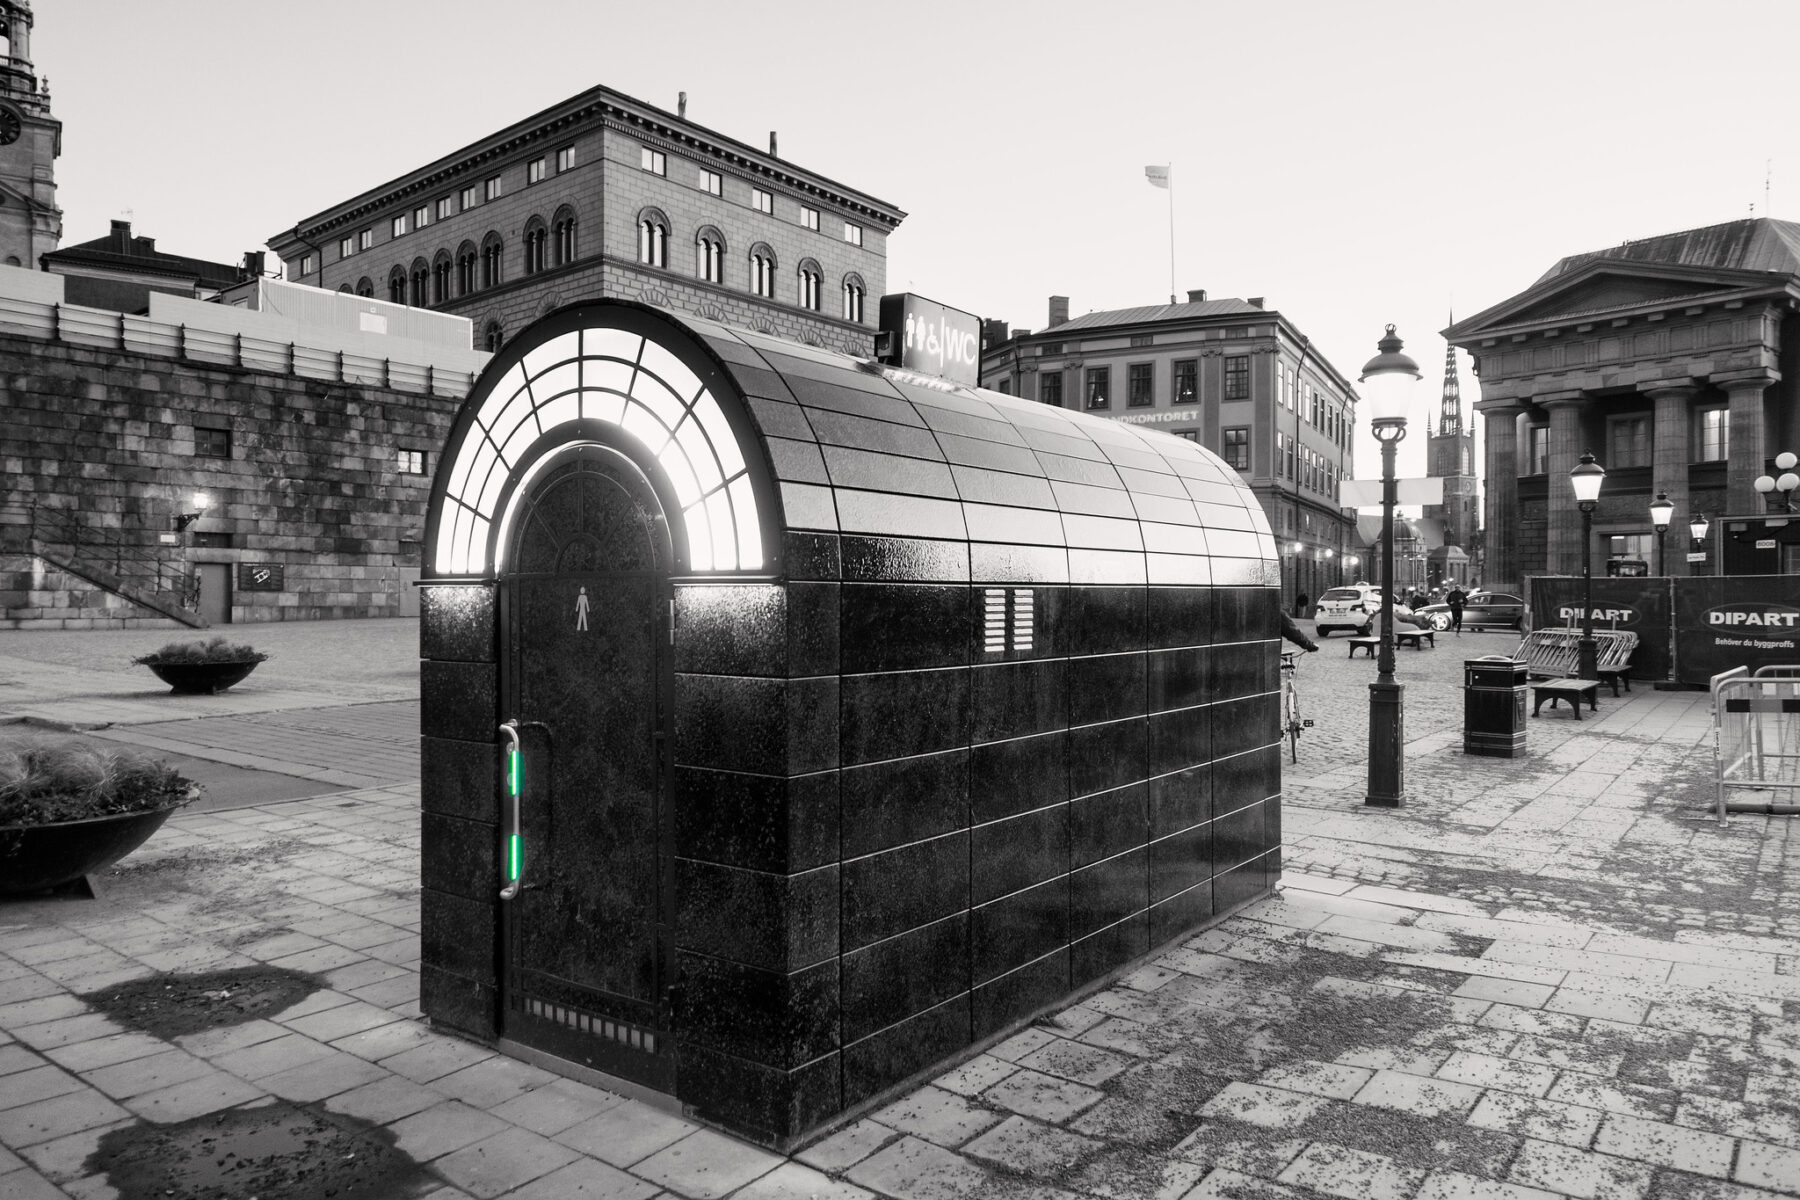 A public toilet outside the Royal Palace of Stockholm (Photo Eric Kilby)